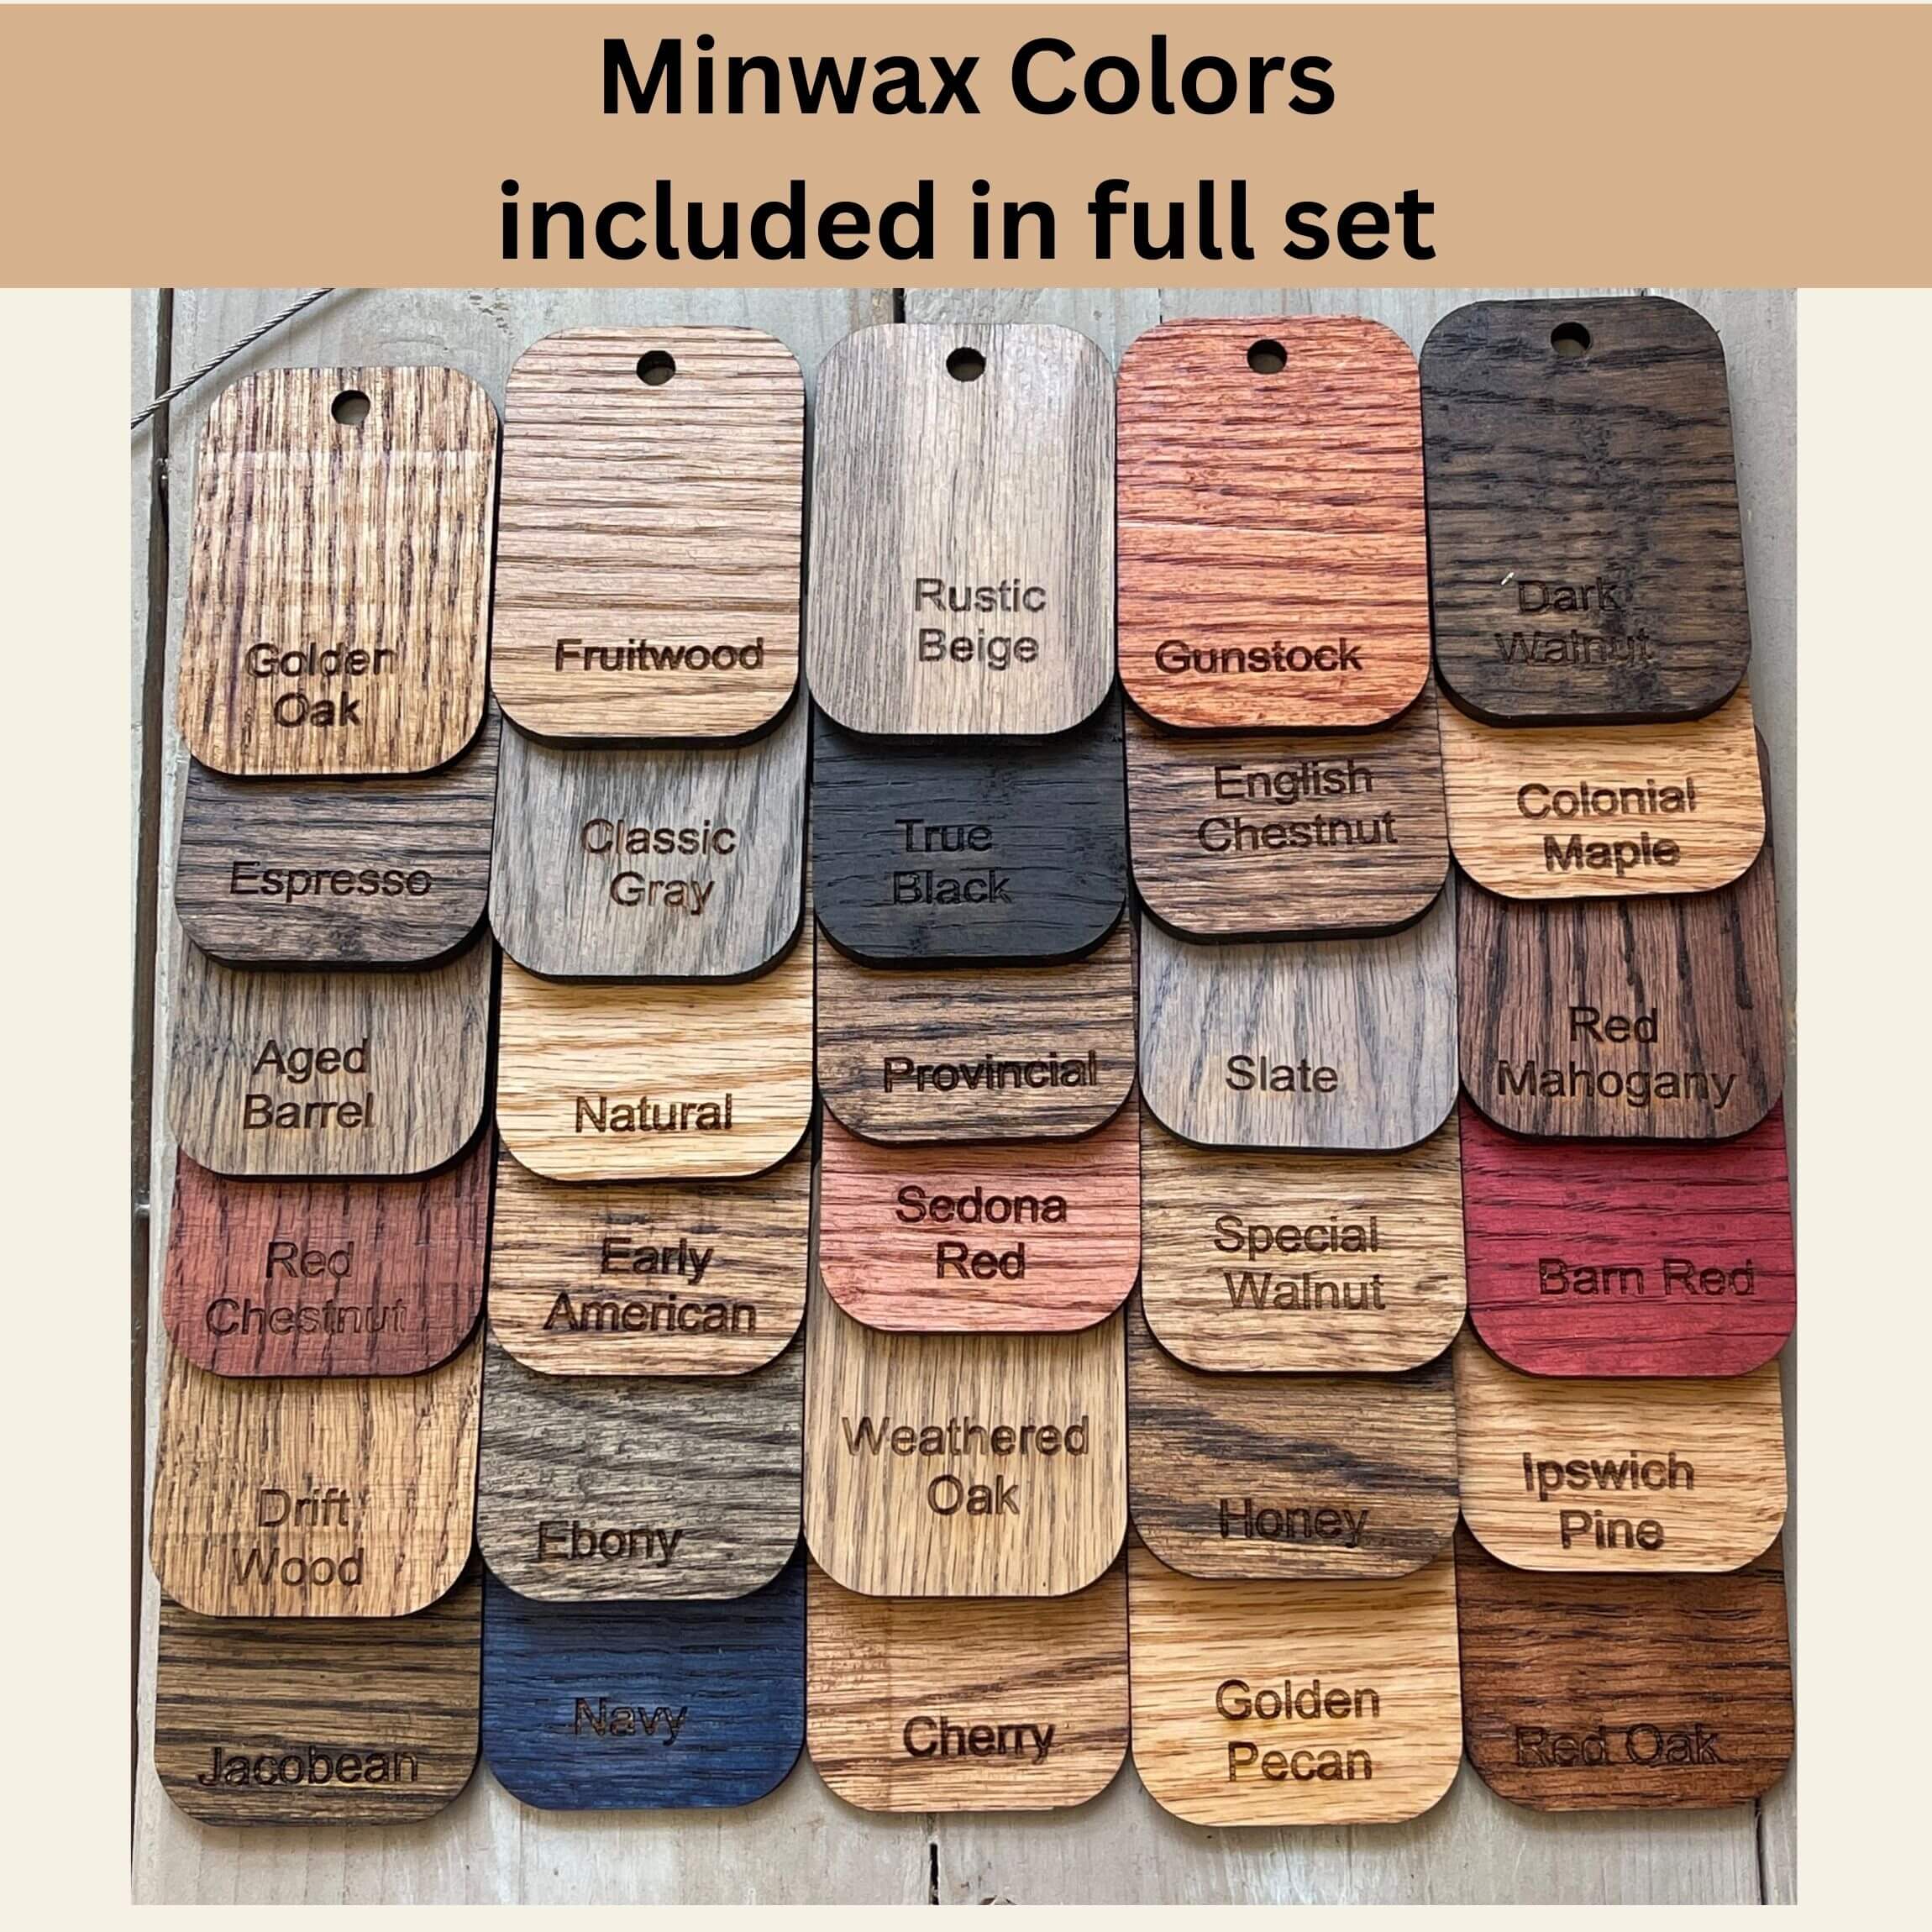 Pine wood stain samples are also an available option. Here the colors are shown. 